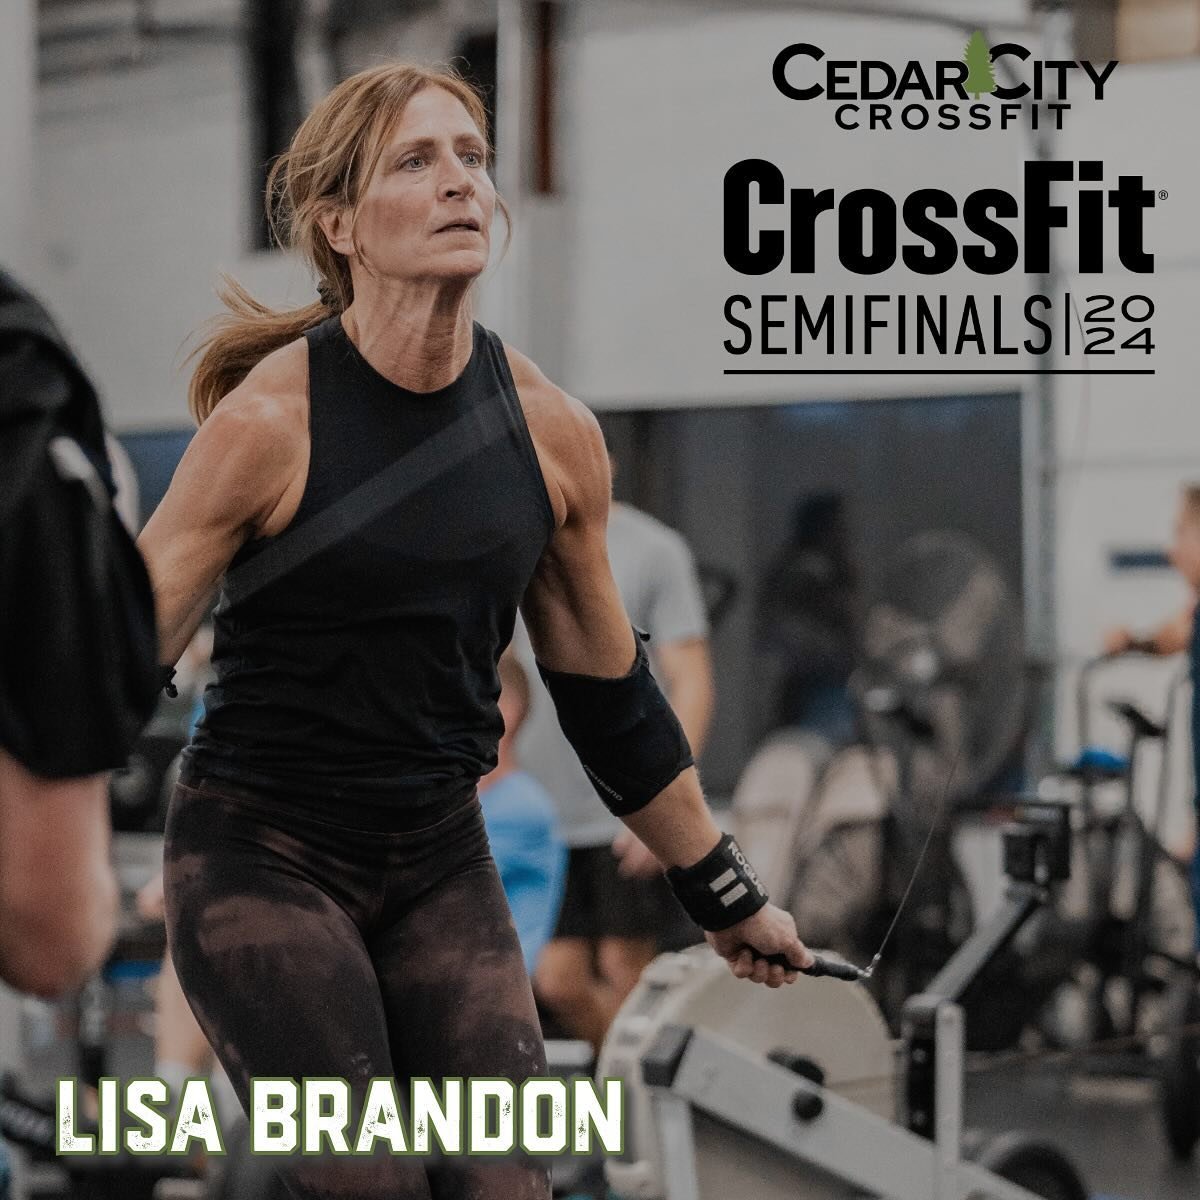 Congrats to coach @lbran9608 for qualifying for the 2024 @crossfitgames semifinals! Lisa finished 126th worldwide in her age group and will be competing in the semifinals starting this Wednesday! 💪🏼